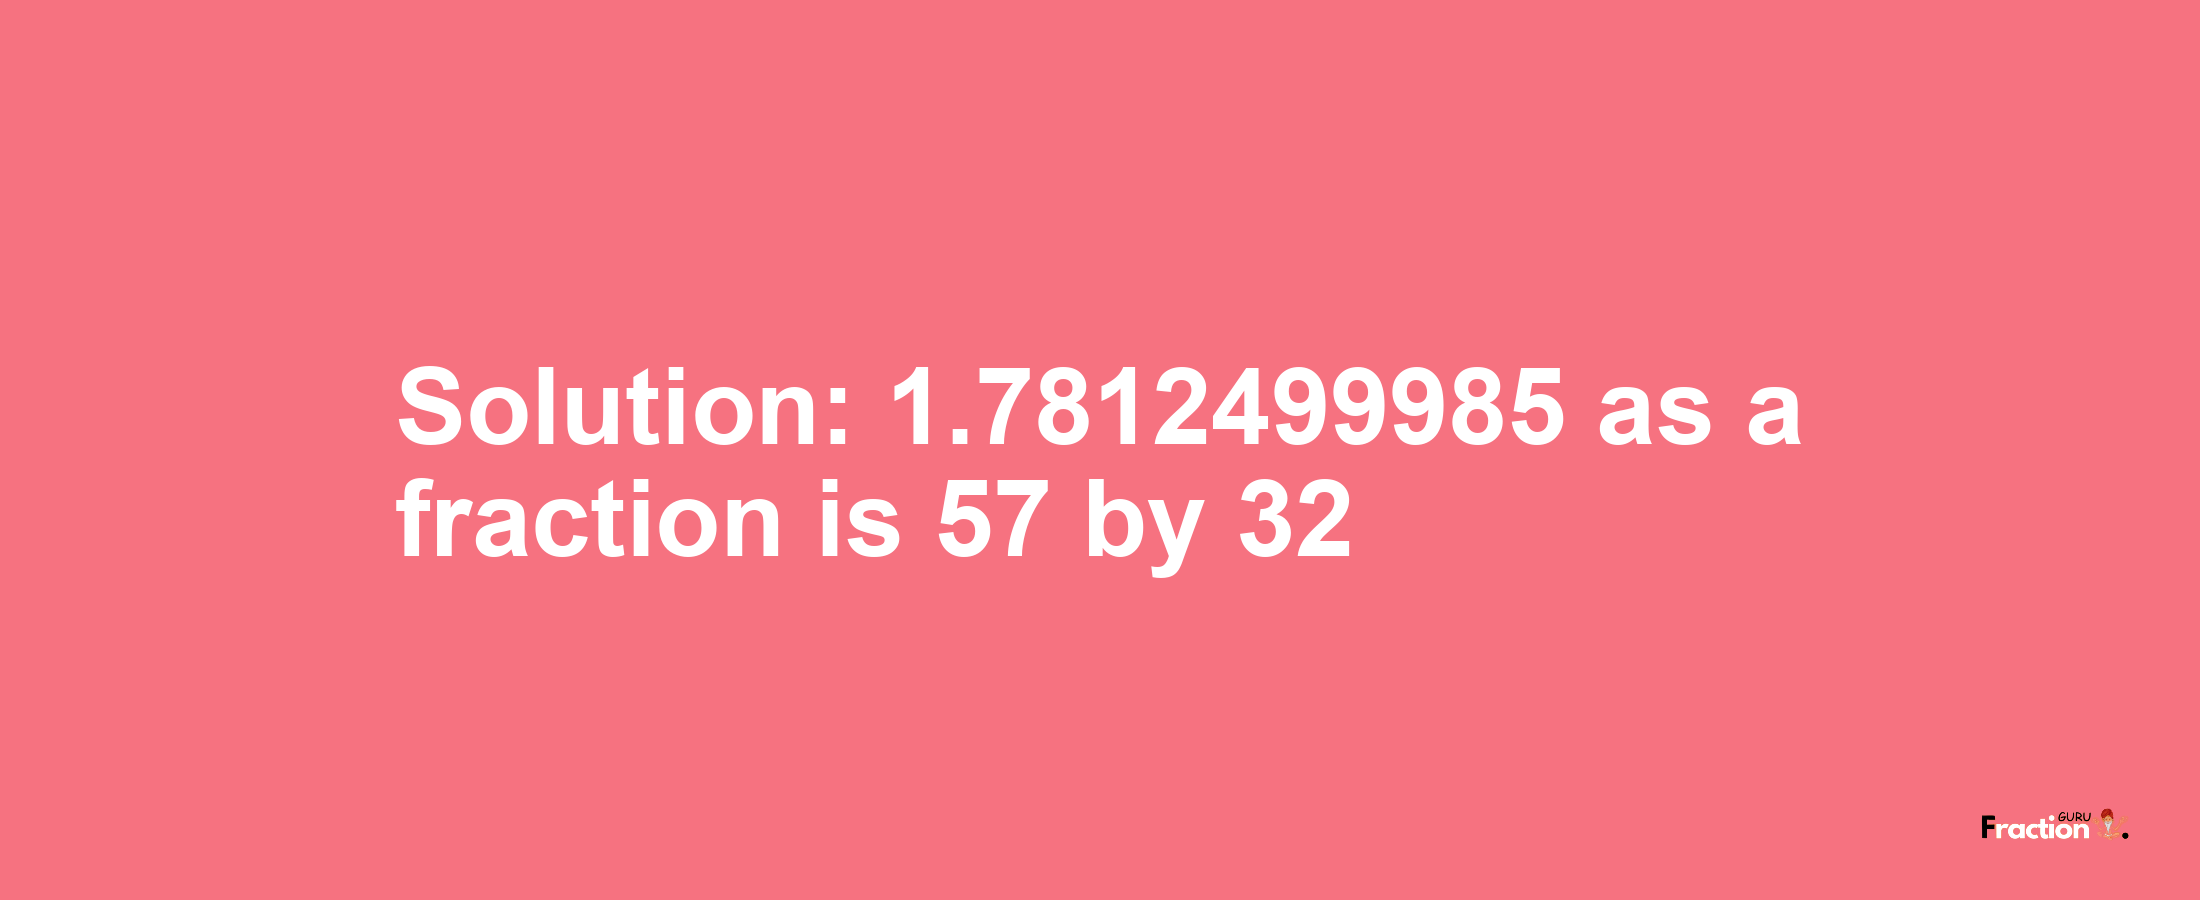 Solution:1.7812499985 as a fraction is 57/32